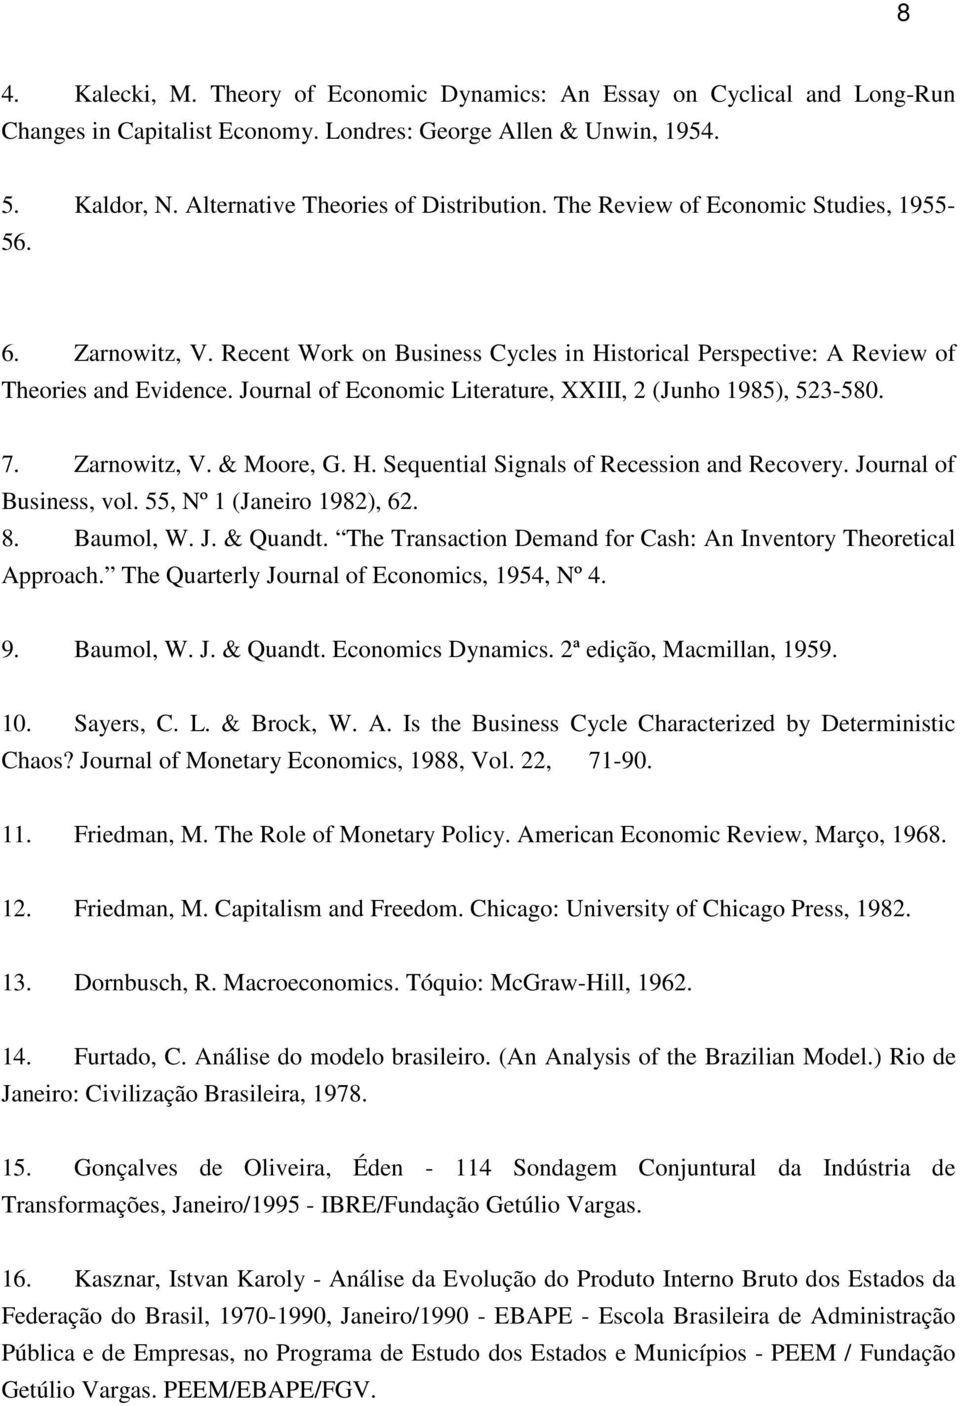 Journal of Economic Literature, XXIII, 2 (Junho 1985), 523-580. 7. Zarnowitz, V. & Moore, G. H. Sequential Signals of Recession and Recovery. Journal of Business, vol. 55, Nº 1 (Janeiro 1982), 62. 8.